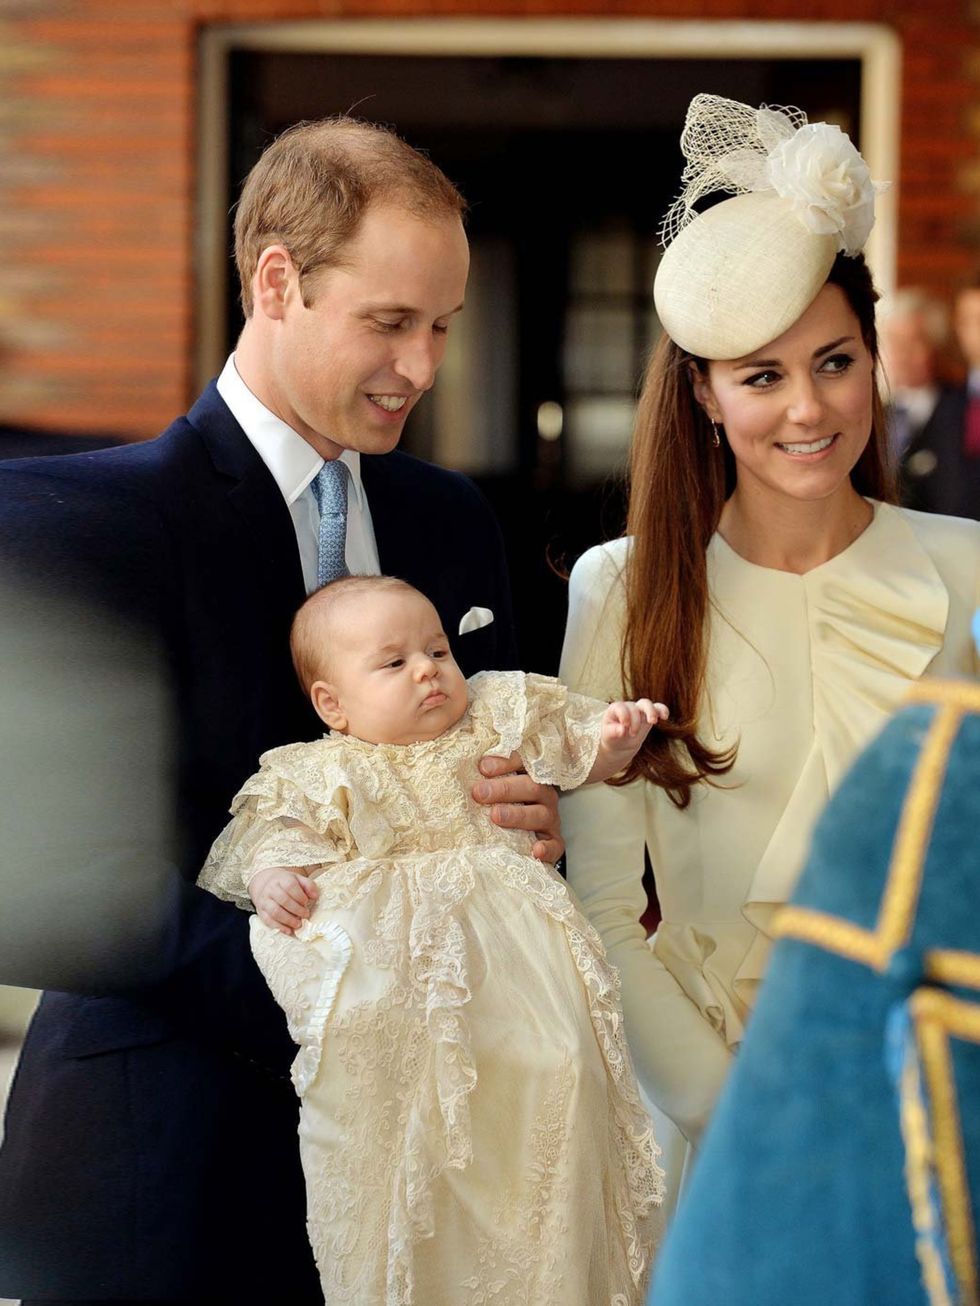 <p>The Duke and <a href="http://www.elleuk.com/star-style/celebrity-style-files/kate-middleton-s-style-file">Duchess of Cambridge</a> with their son Prince George arrive at Chapel Royal in St James's Palace, ahead of the christening of the three month-old